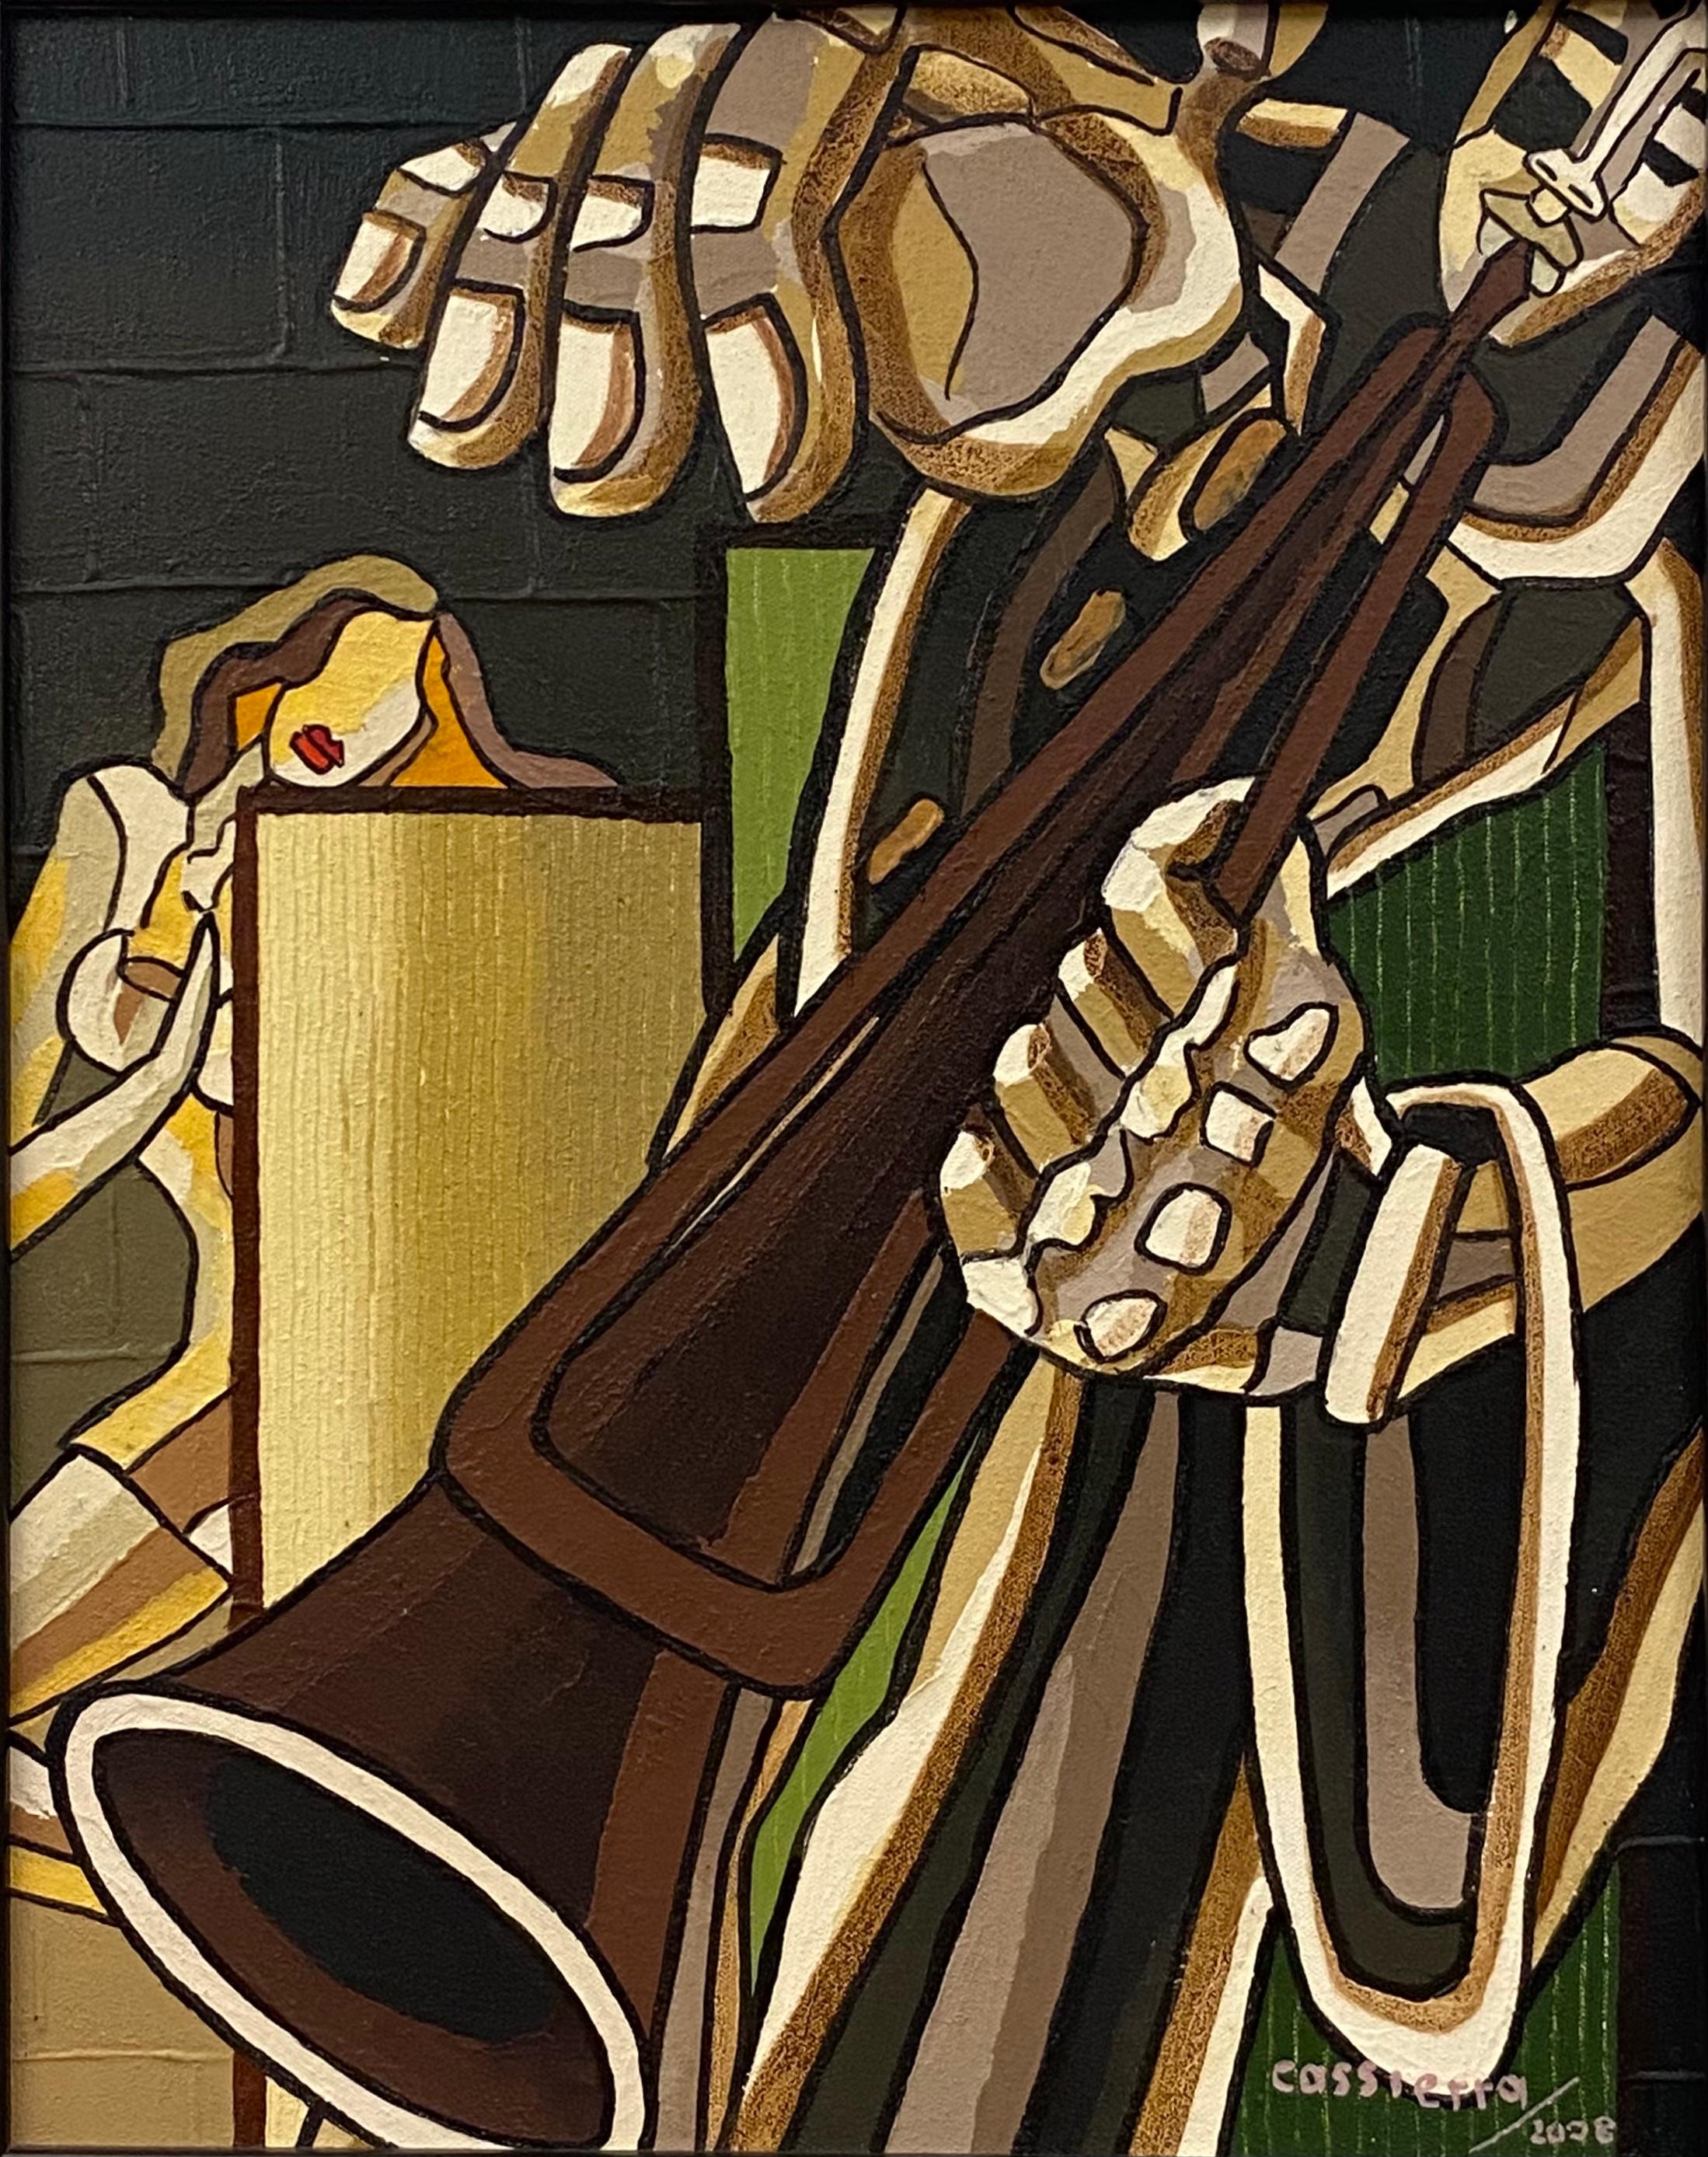 A very decorative original oil on canvas painting by American artist, Franklin Cassierra featuring a jazz musician. 

Franklin Cassierra, (American, Contemporary), New York City Soho street artist, painterly composition of man playing guitar for a